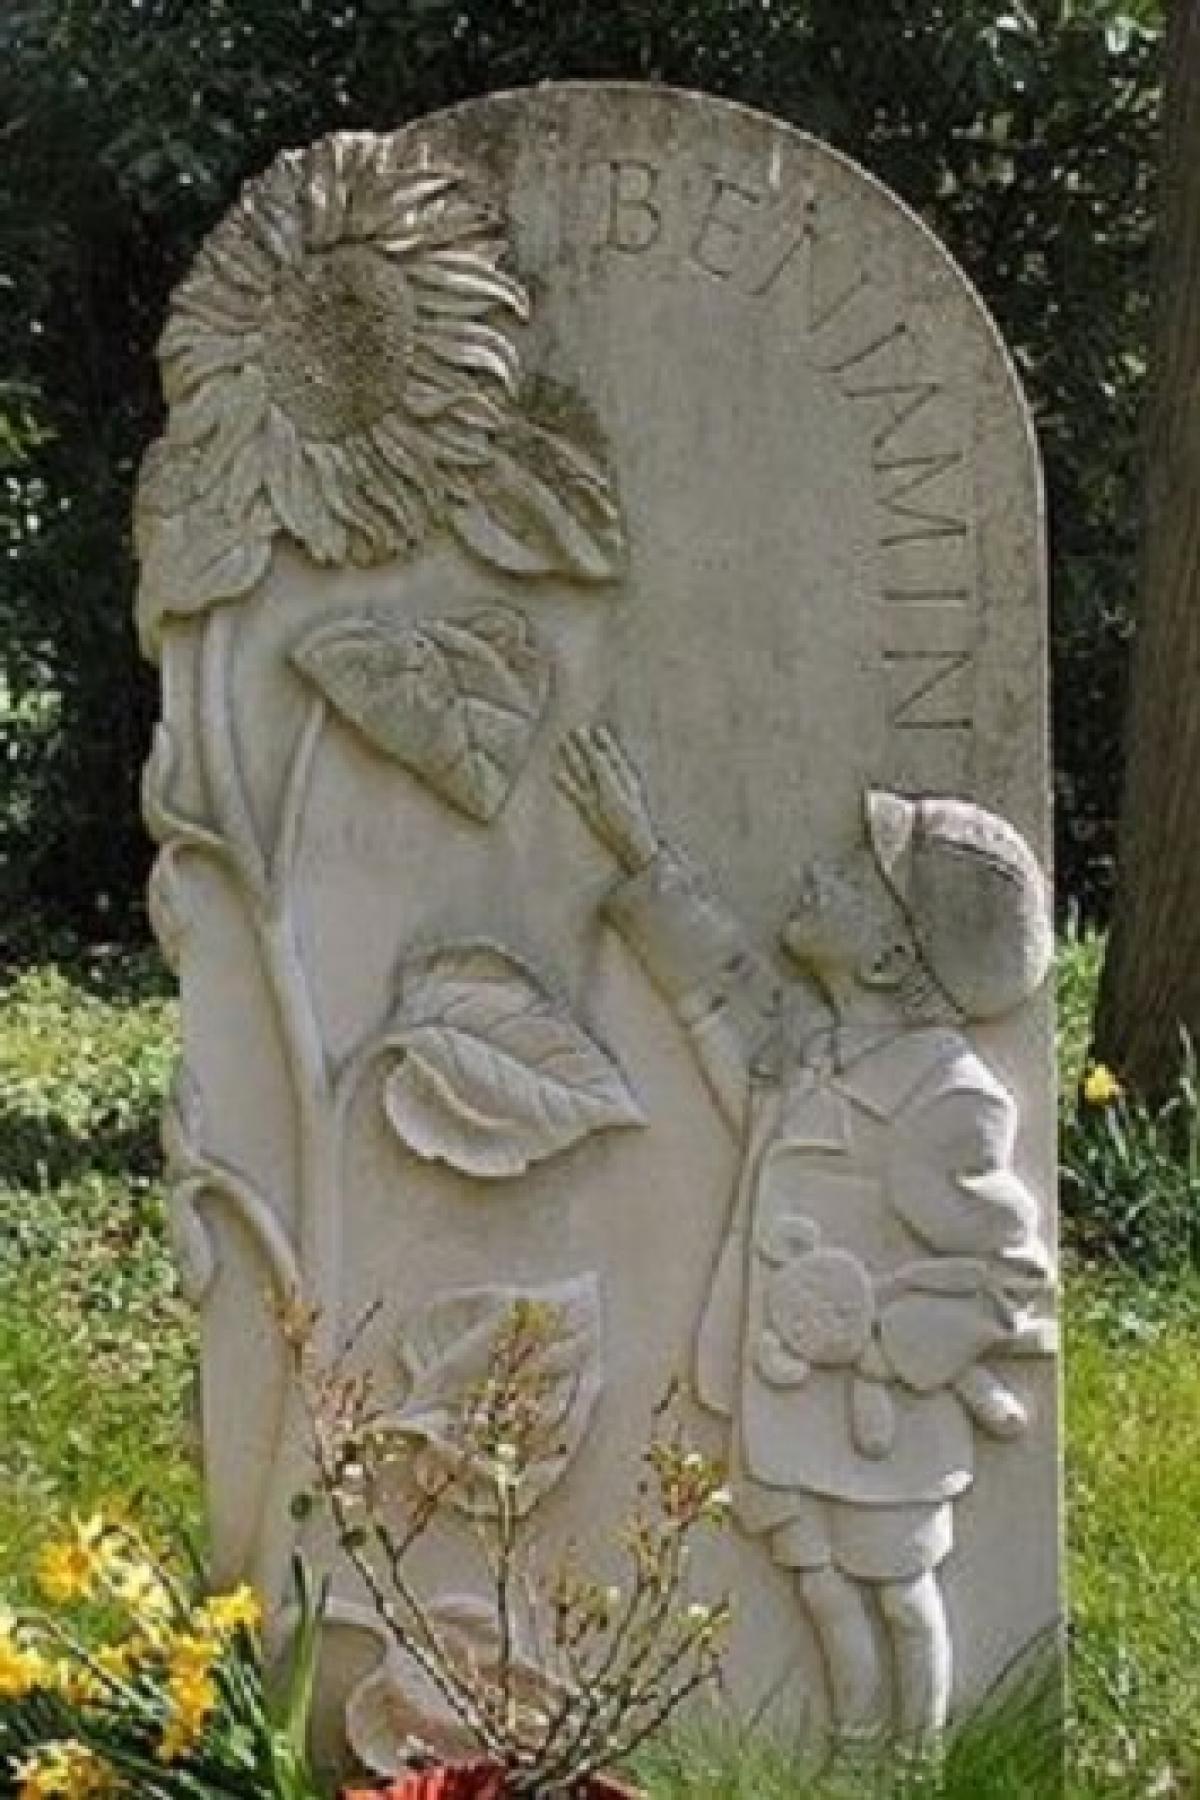 OK, Grove, Headstone Symbols and Meanings, Sunflower